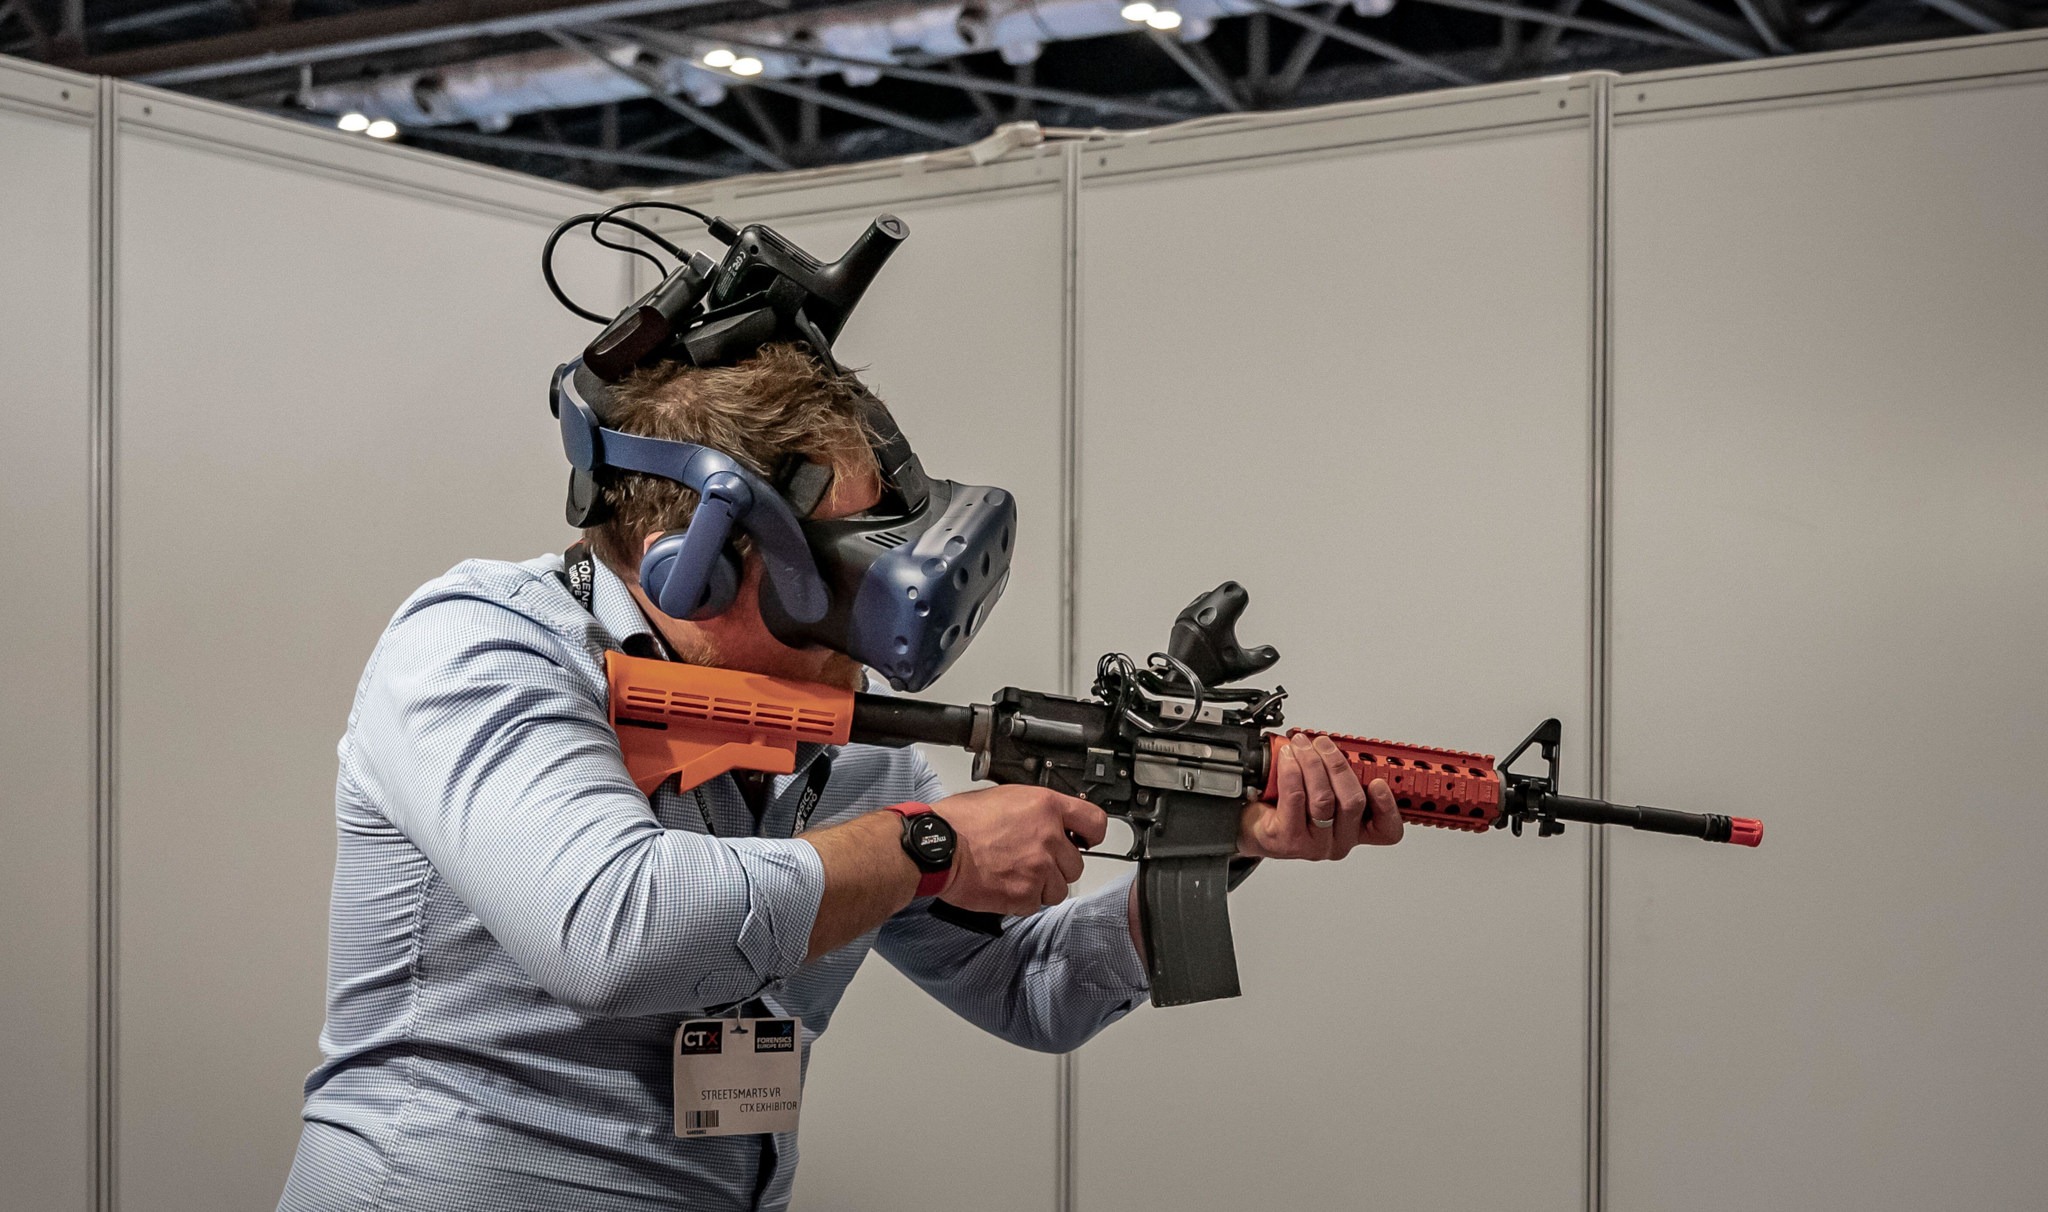 2R2A16F London, UK. 18th May 2023. Virtual reality armed training technology is demonstrated by Street Smarts VR at Counter Terror and Forensics Europe Expo (CTX), Excel Centre. Security professionals from industry, government and policing exhibit and demonstrate latest technology to improve security and aid in the fight against international terrorism. Credit: Guy Corbishley/Alamy Live News